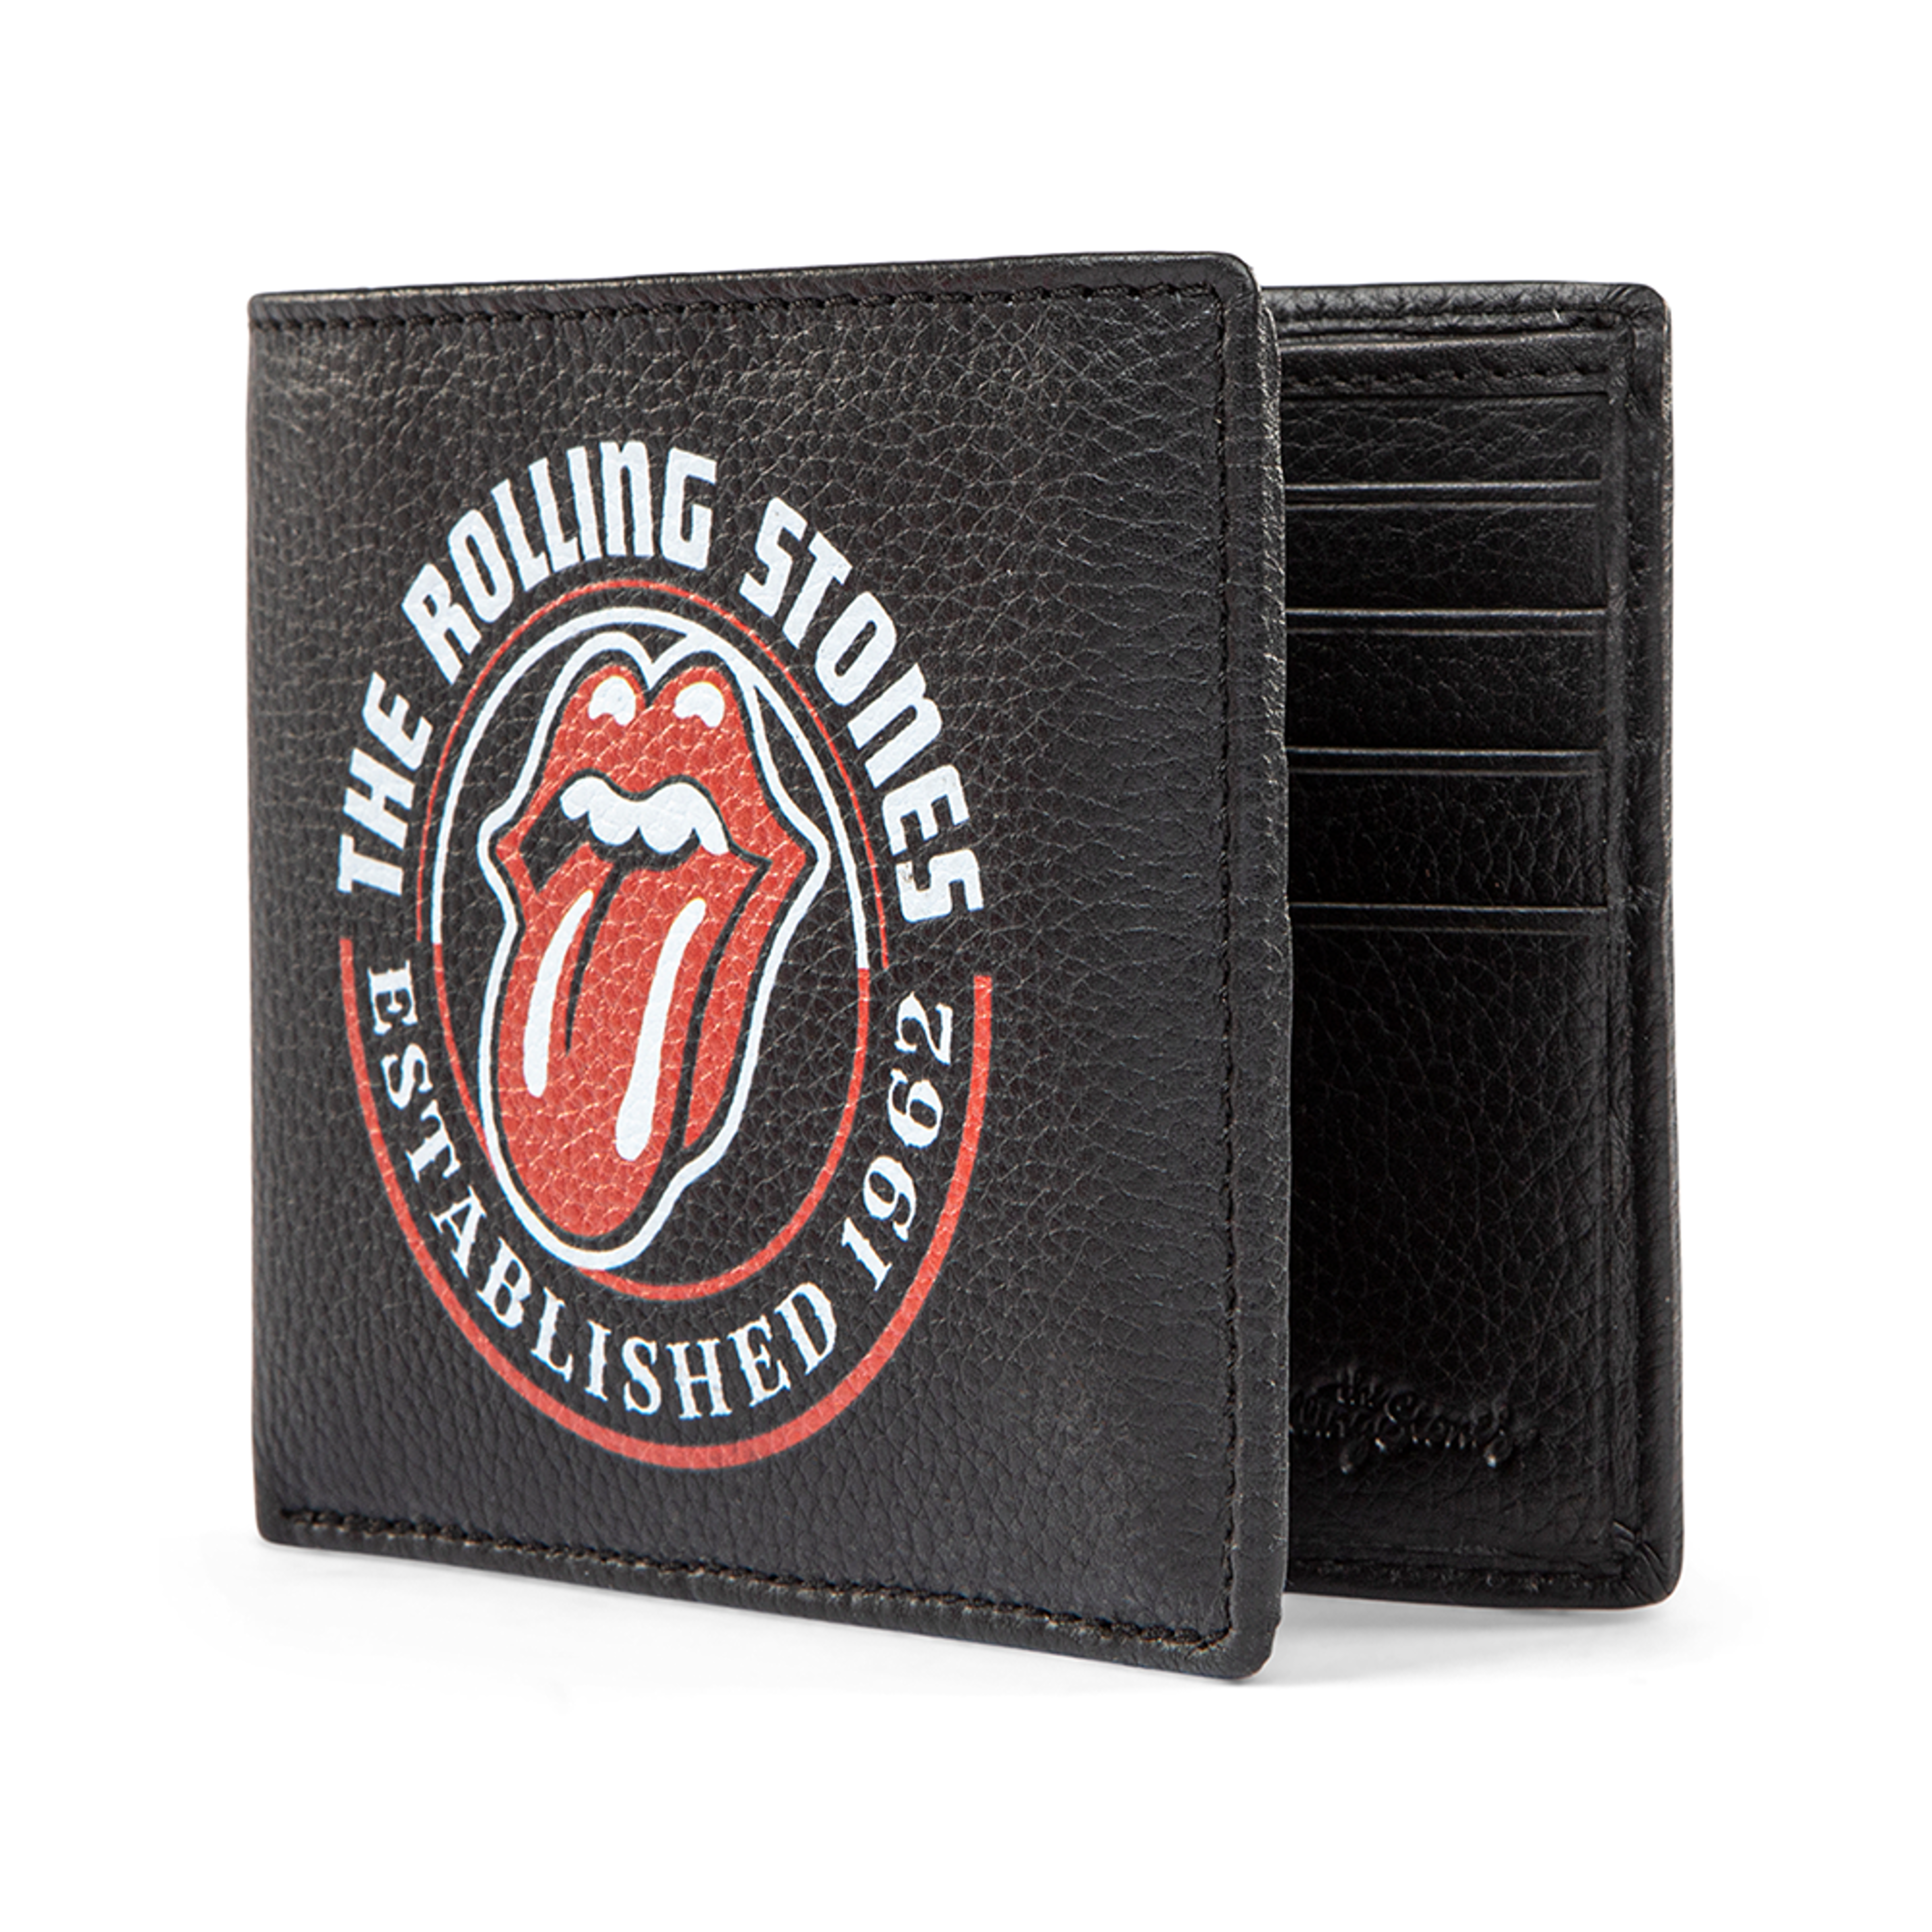 The Watts Men's Leather Wallet